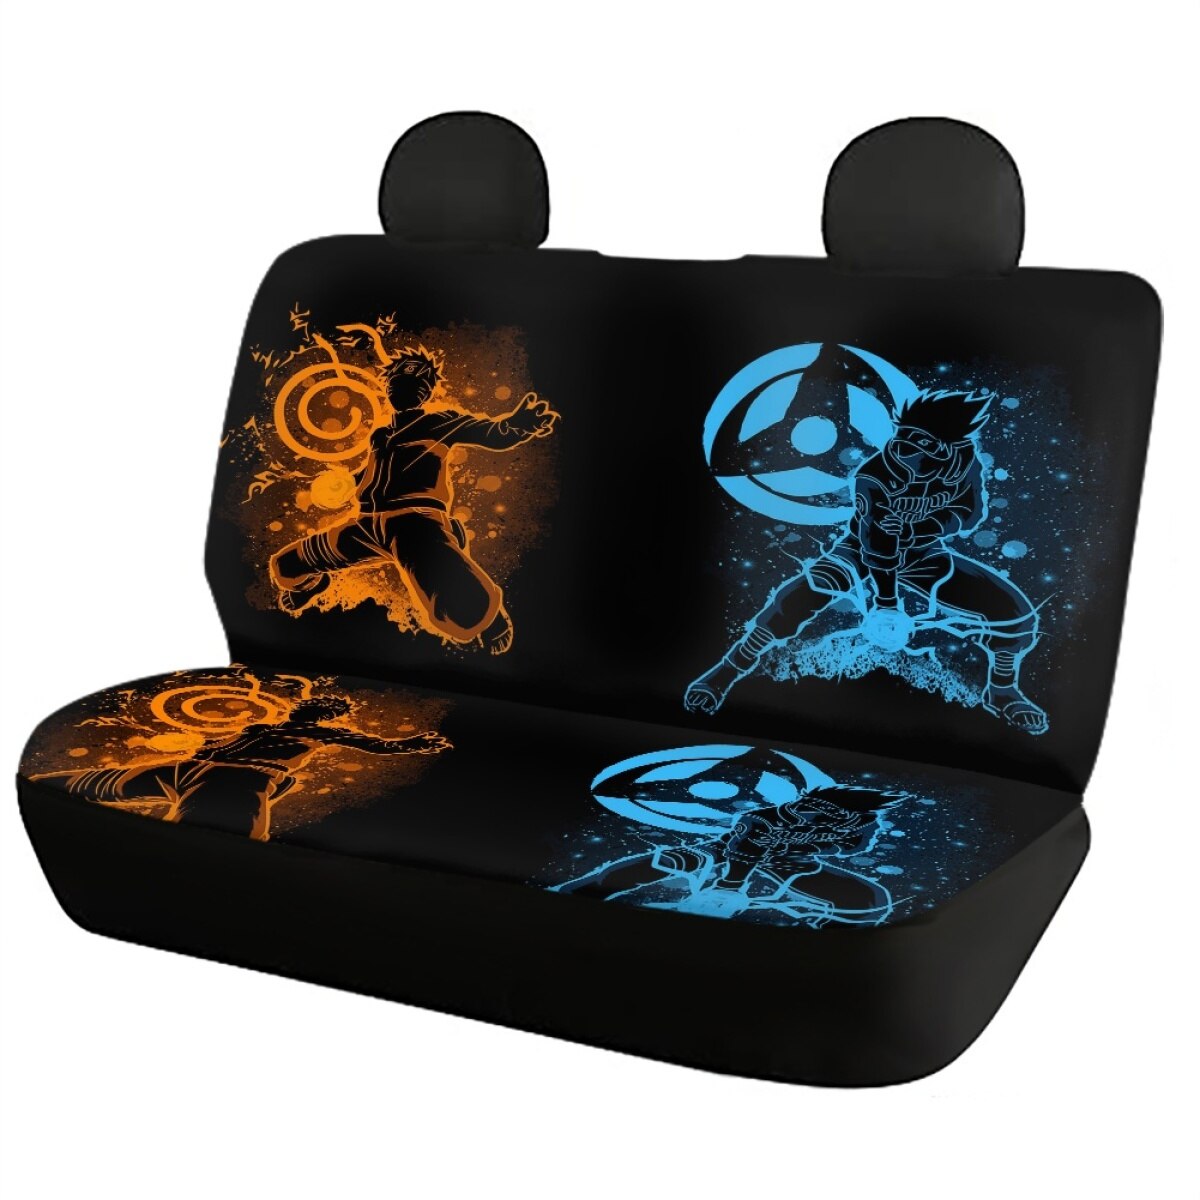 Naruto Anime Print Full Set Vehicle Seat Cover for Men Cool Non-skid Front/Back Car Seat Cover fit Most Car SUV Van Car Accessories, everythinganimee